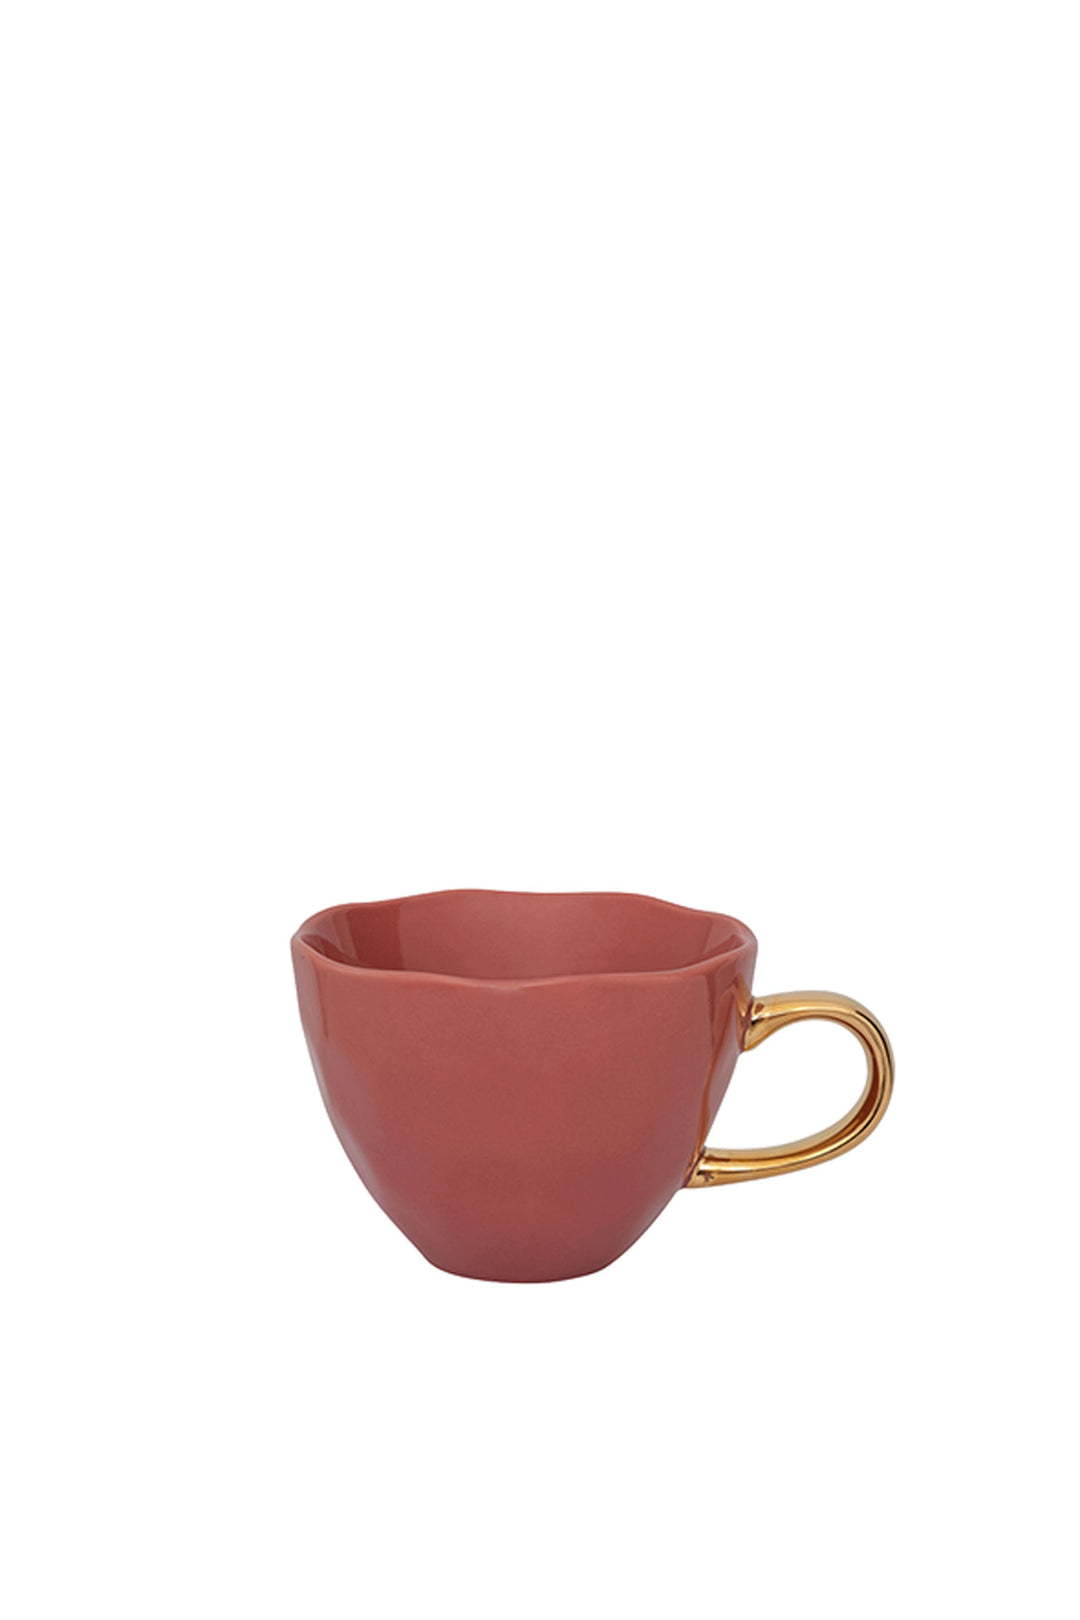 Husk COFFEE CUP - Red Pink